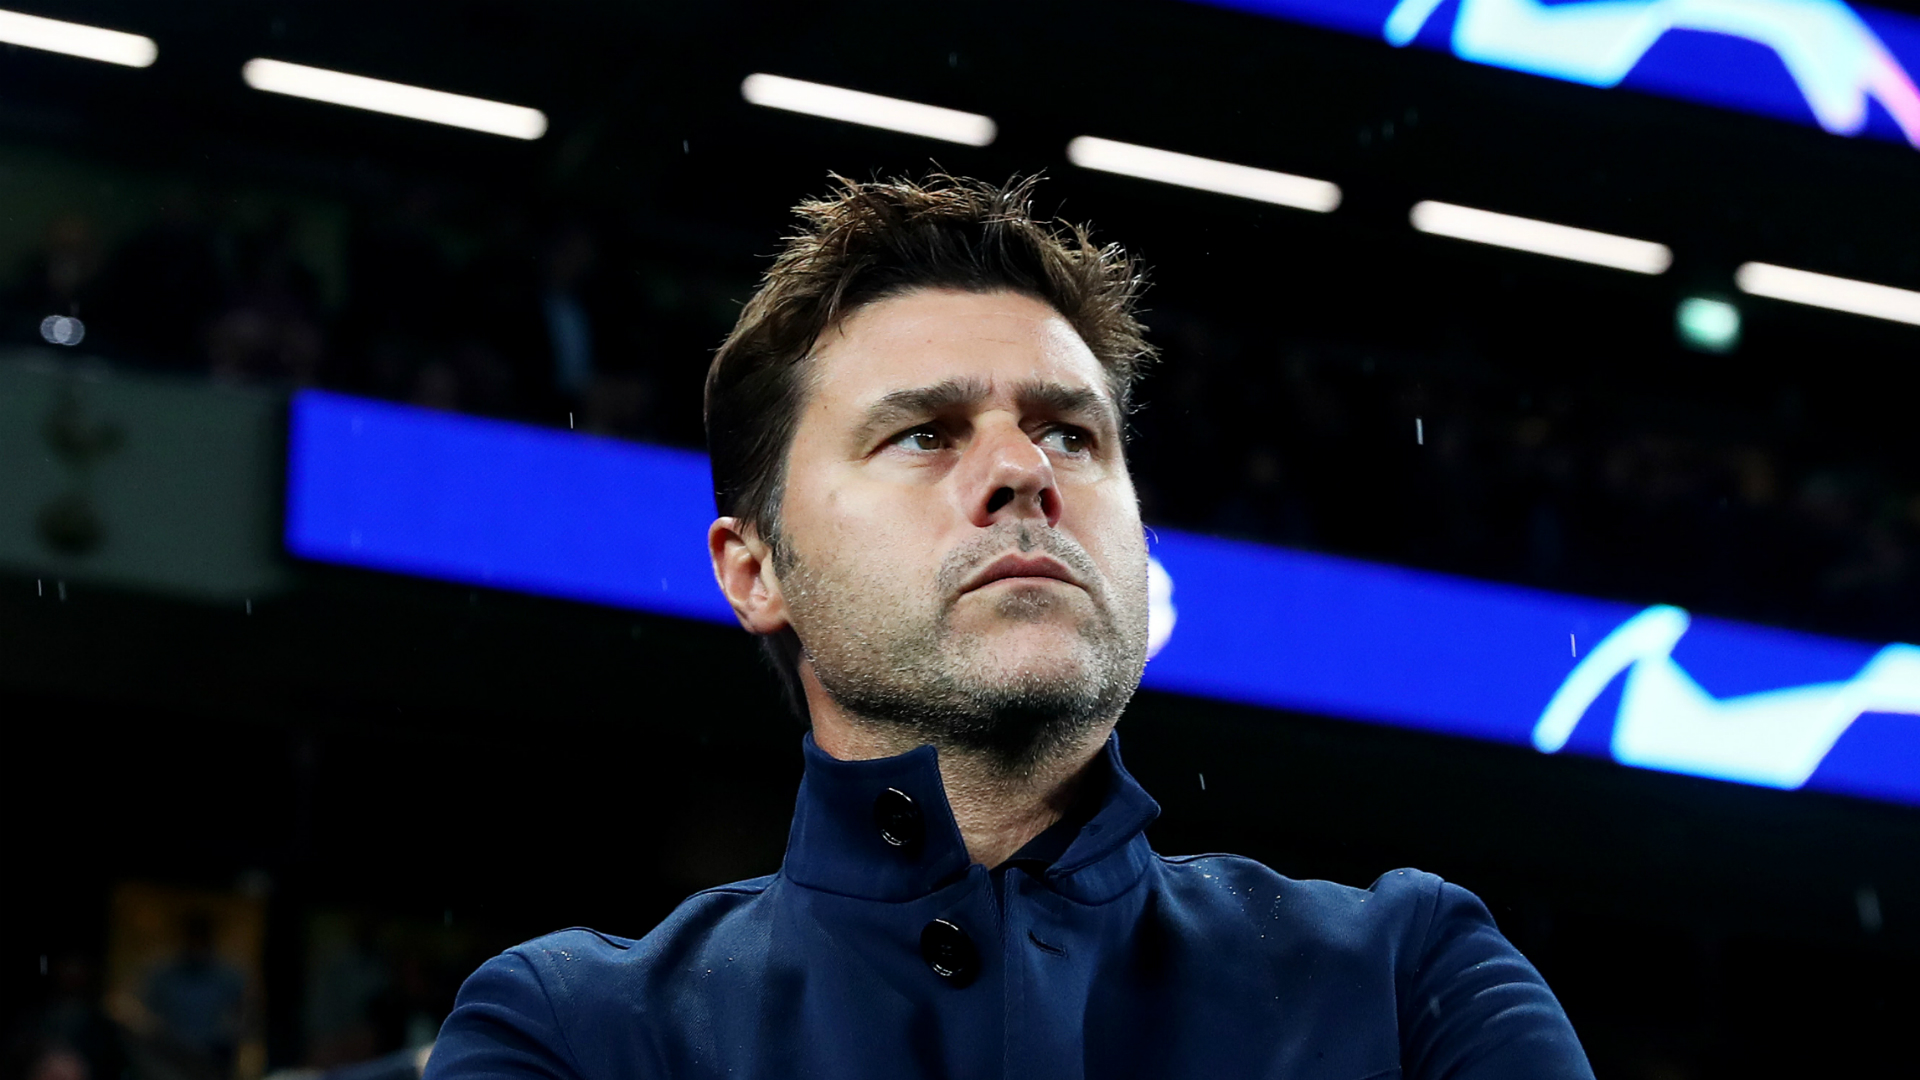 Tottenham suffered a humiliating 7-2 defeat to Bayern Munich on Tuesday and Mauricio Pochettino urged his players to show some unity.